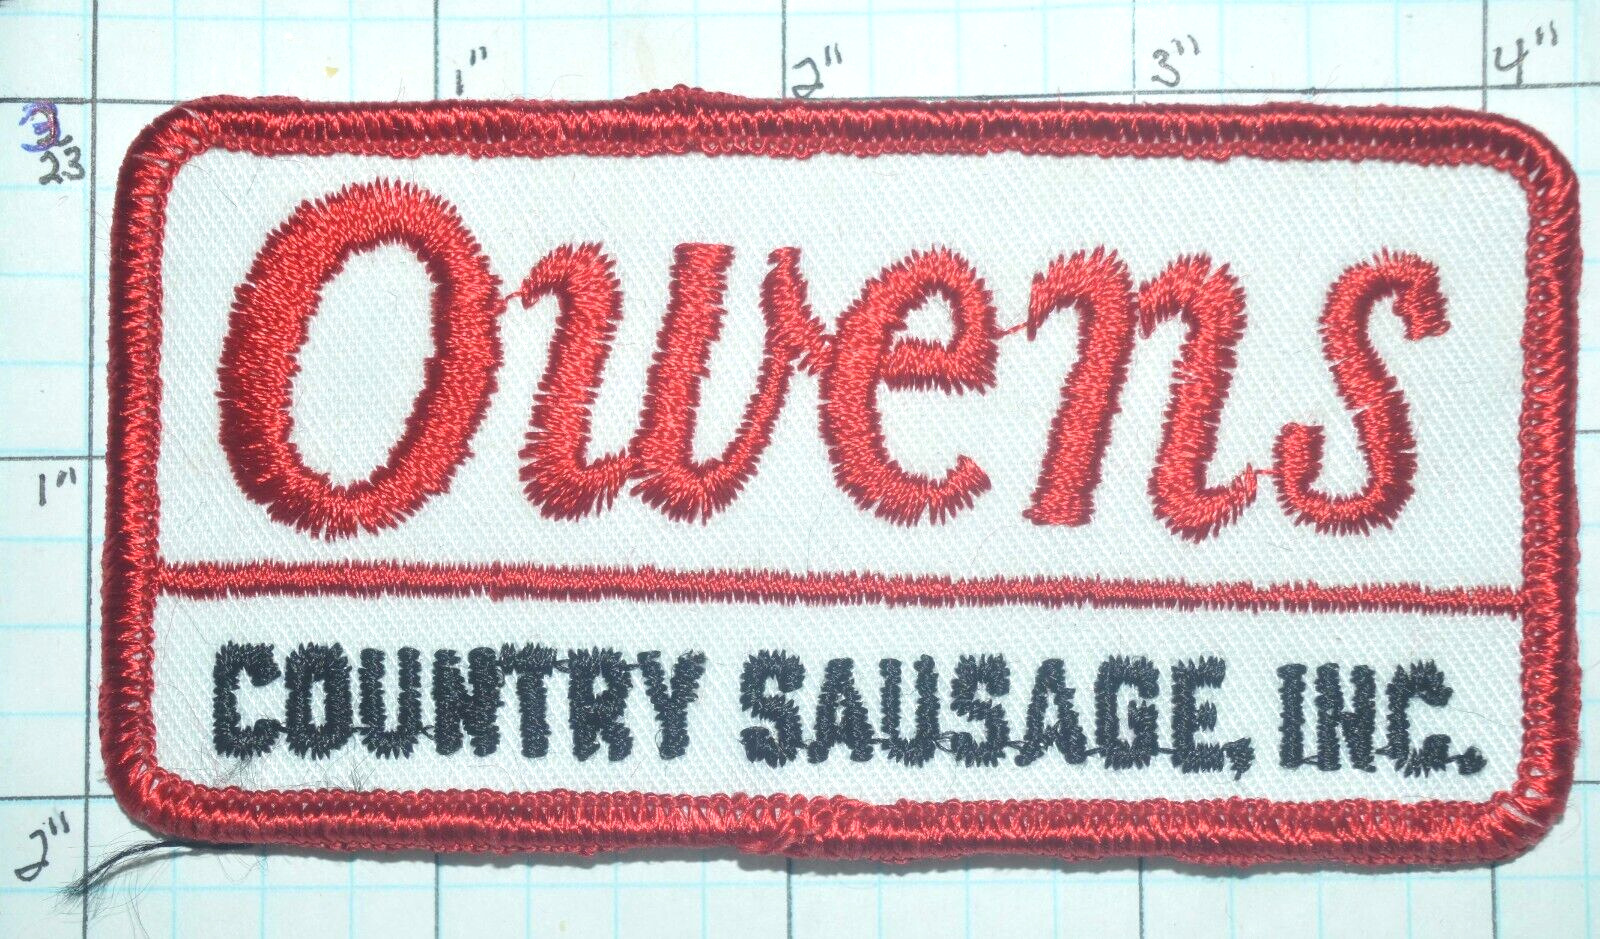 OWENS COUNTRY SAUSAGE INC TEXAS VINTAGE ADVERTISING OR EMPLOYEE PATCH